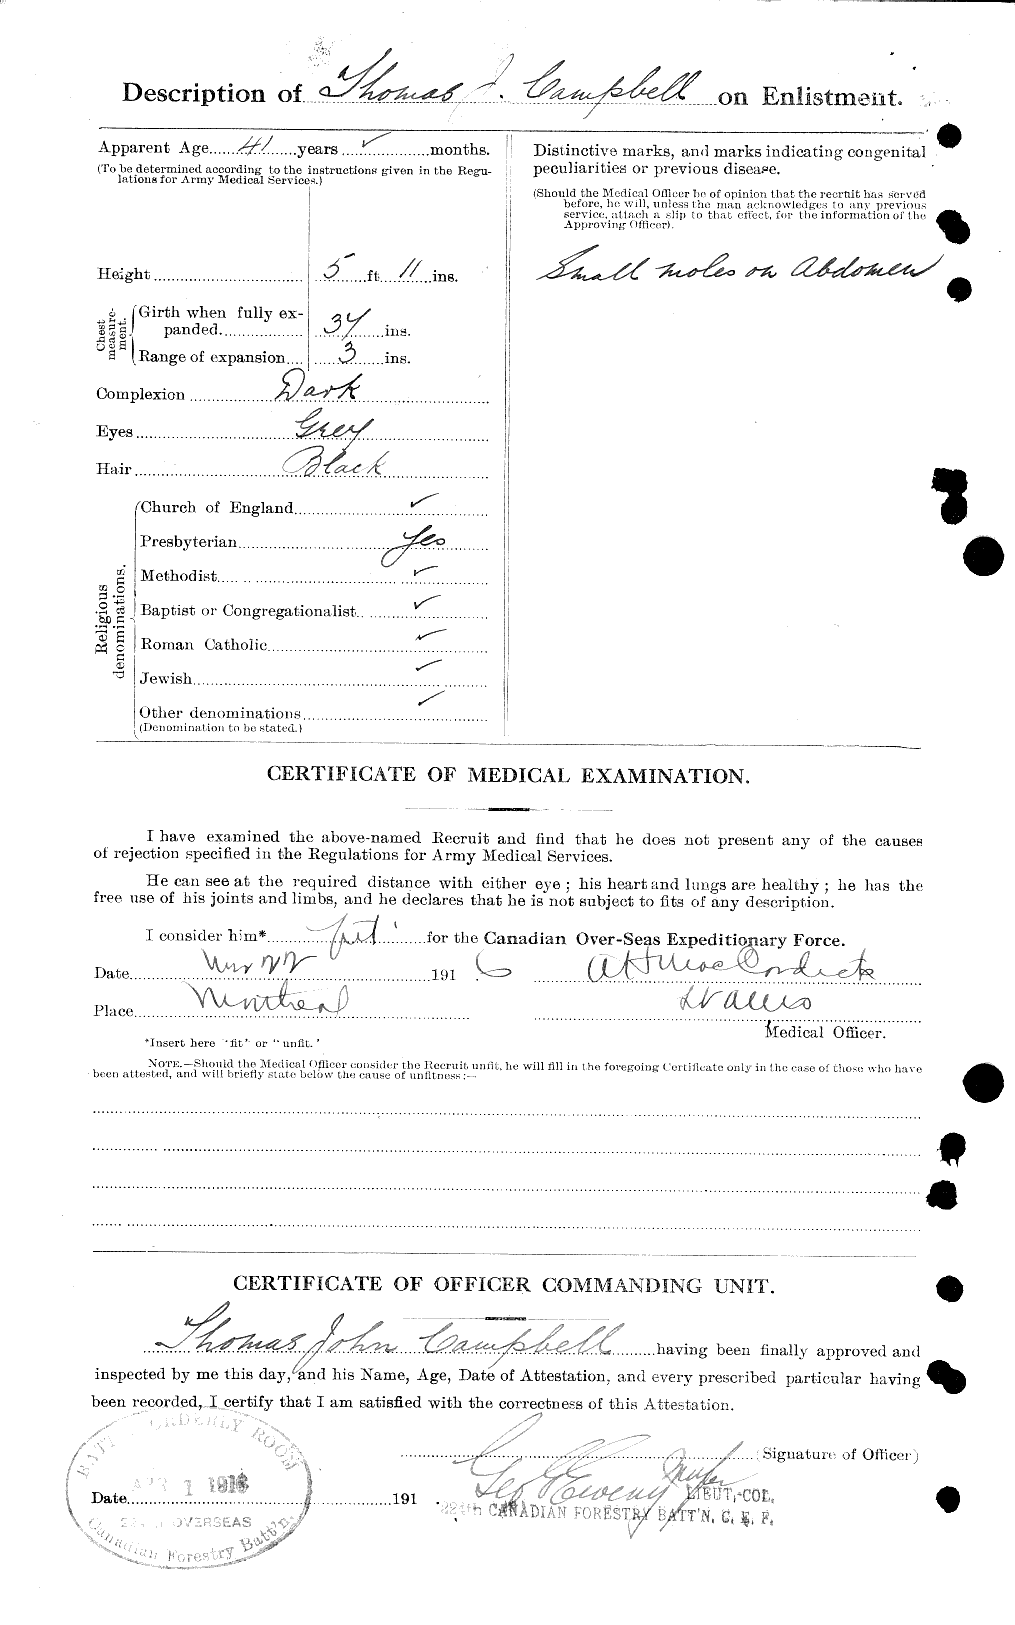 Personnel Records of the First World War - CEF 004060b